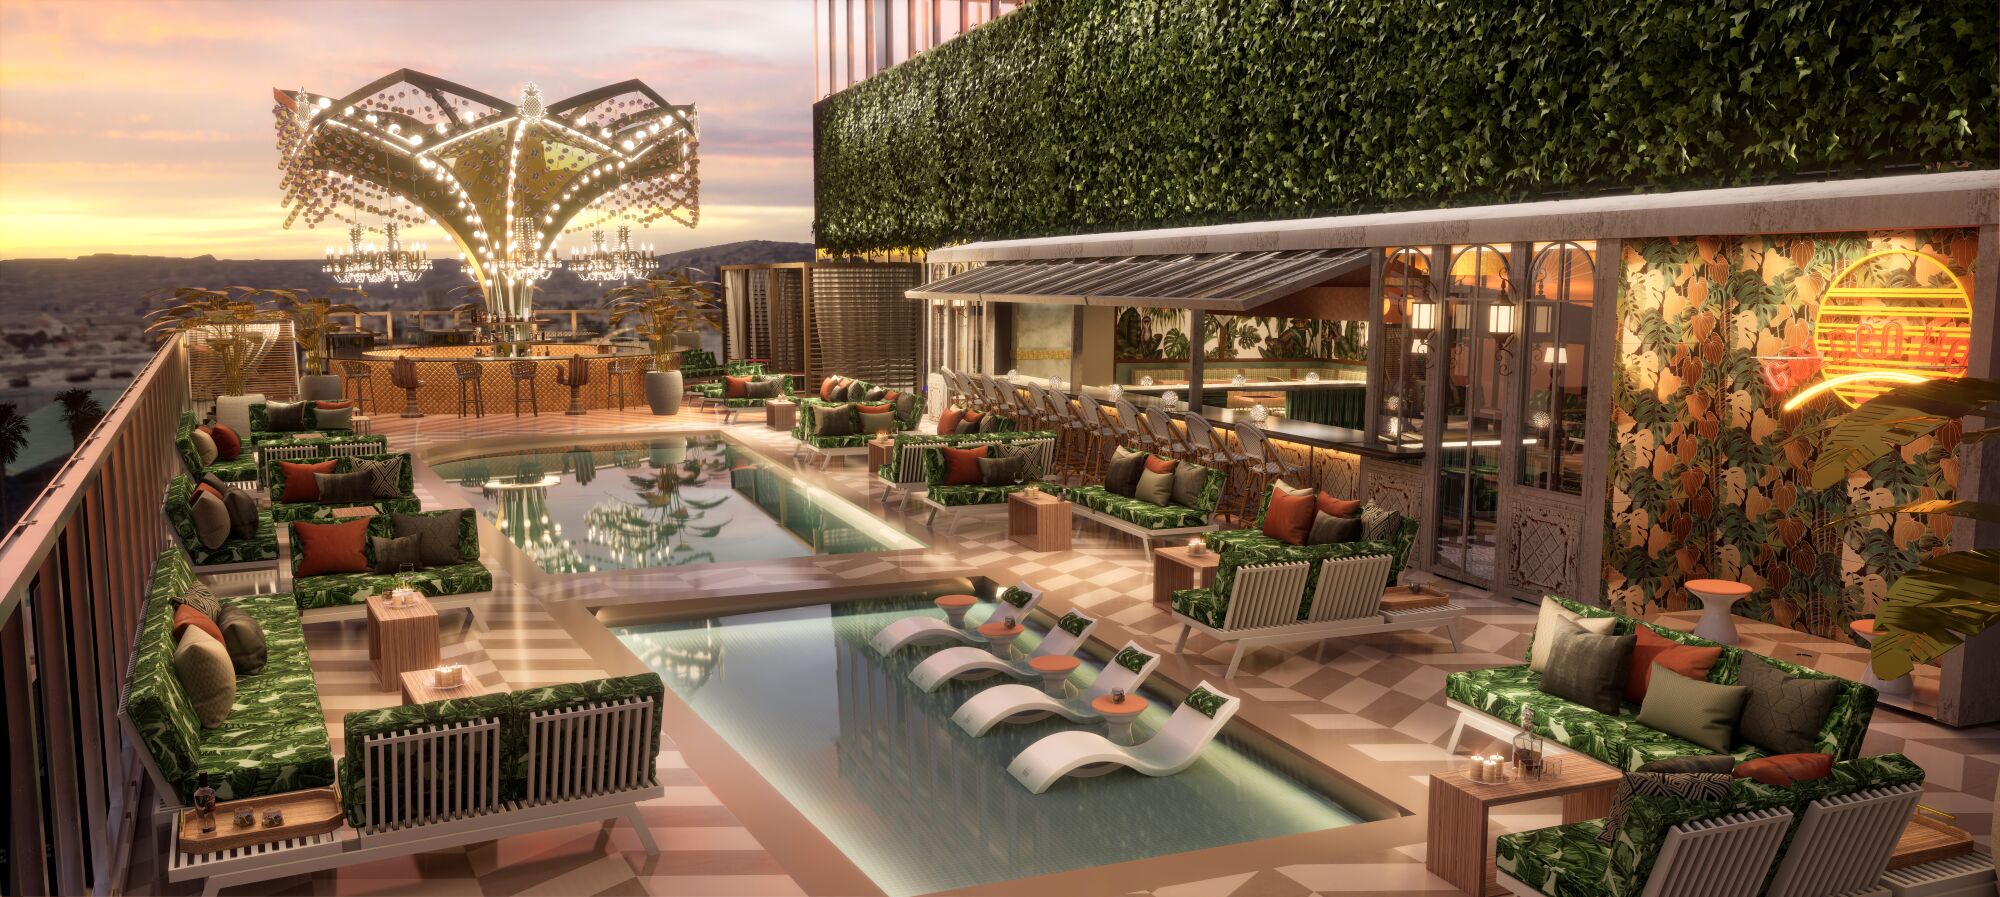 Rendering of the pool deck on the eighth floor that will include a bar under a turning carousel.